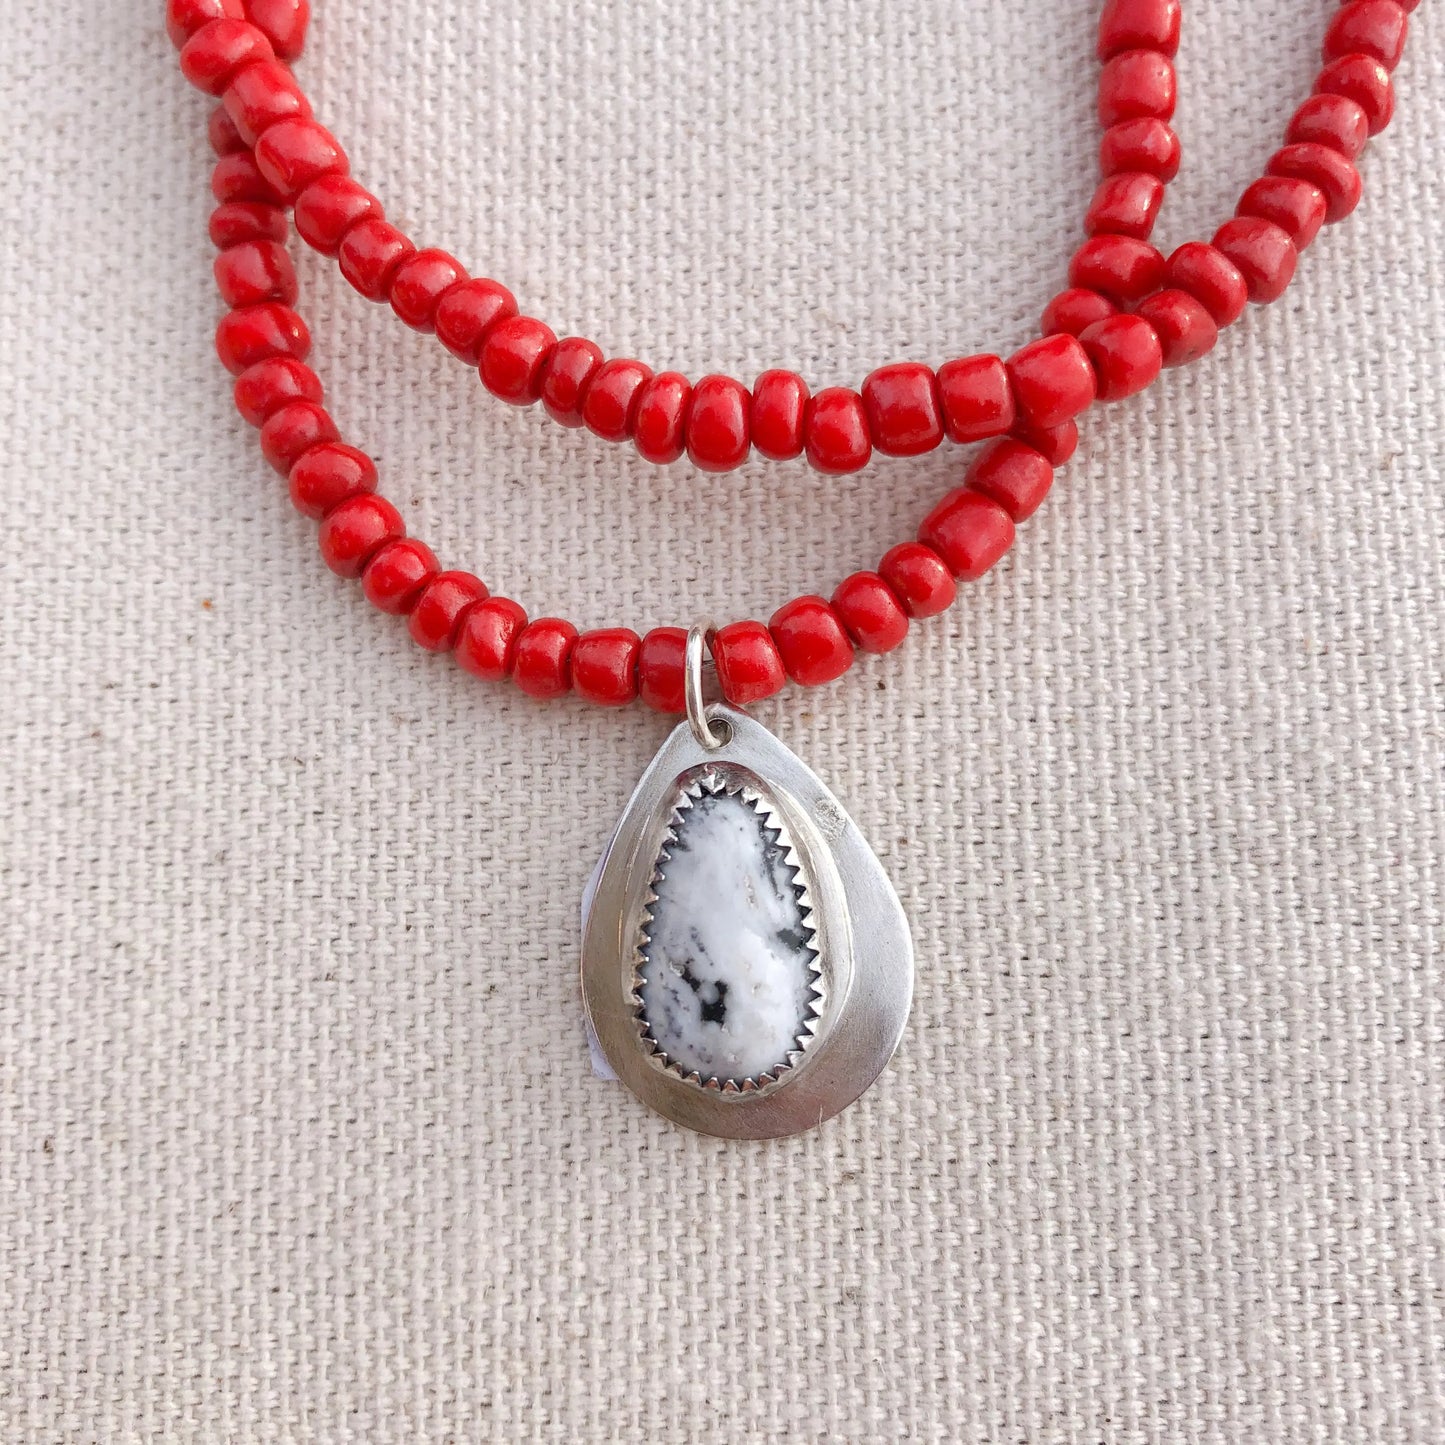 Anya - White Buffalo + Red Beaded Necklace Wind + The Wanderer, LLC